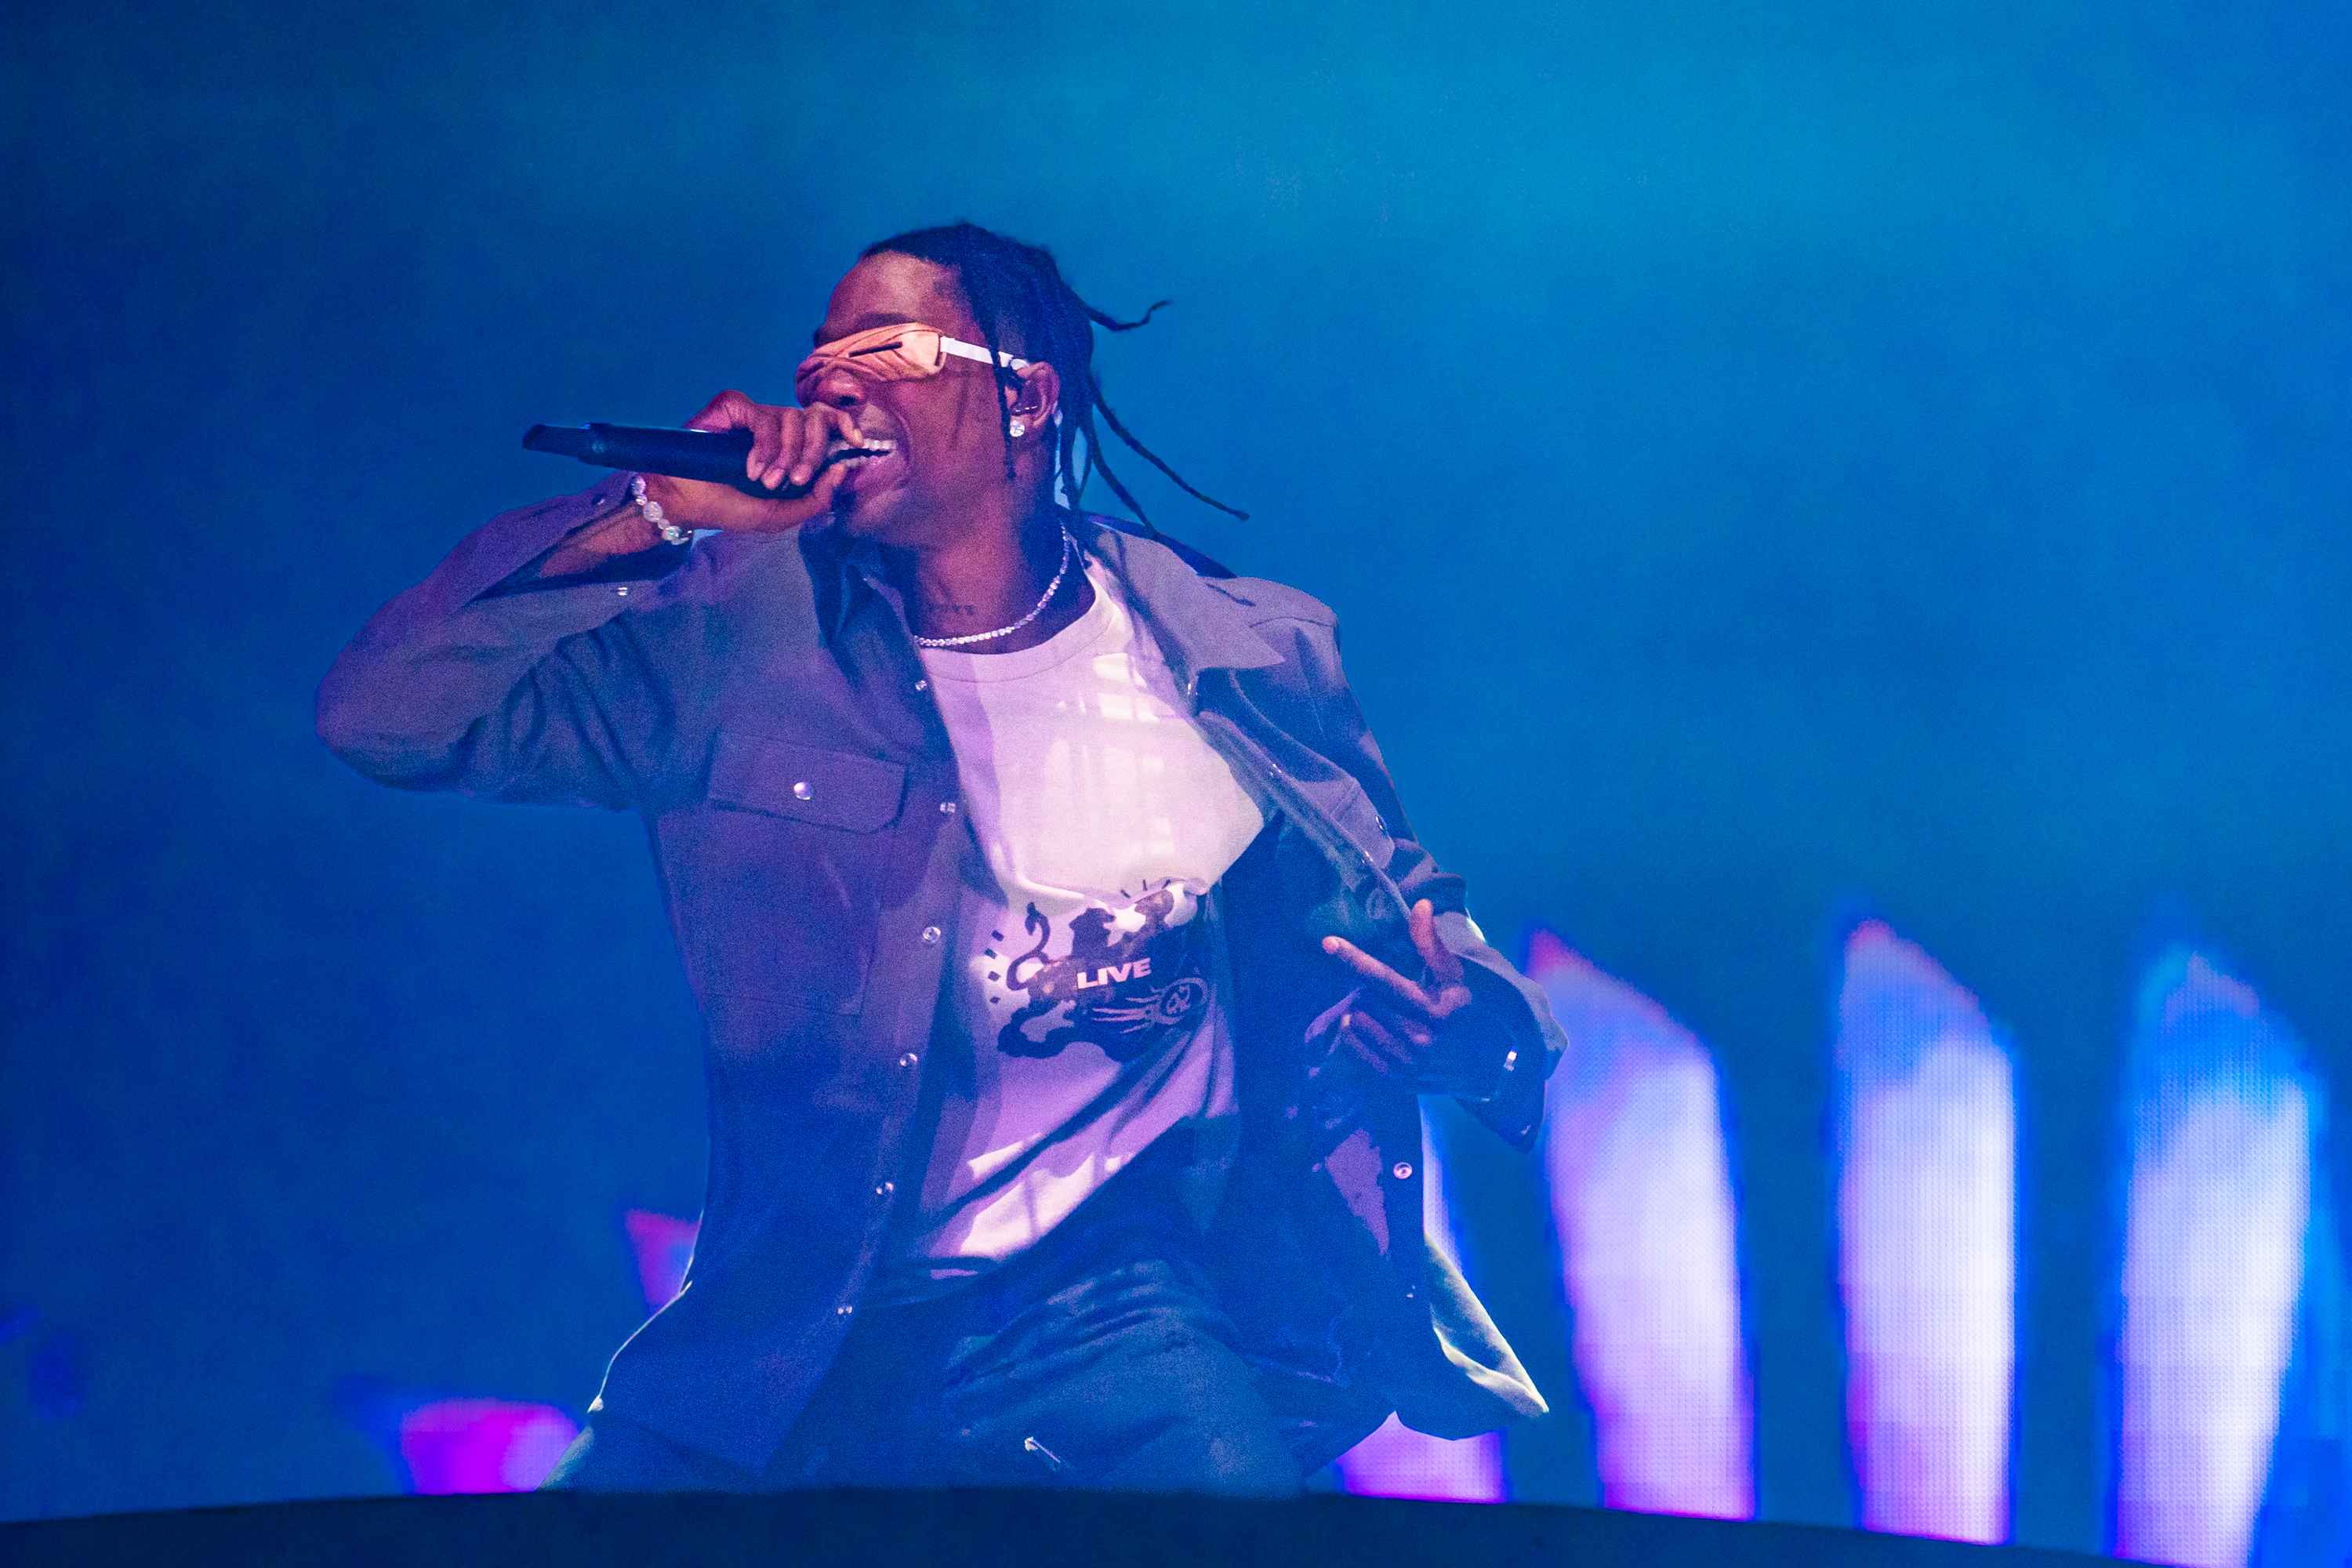 Travis Scott Egypt launch party concert: All we know so far